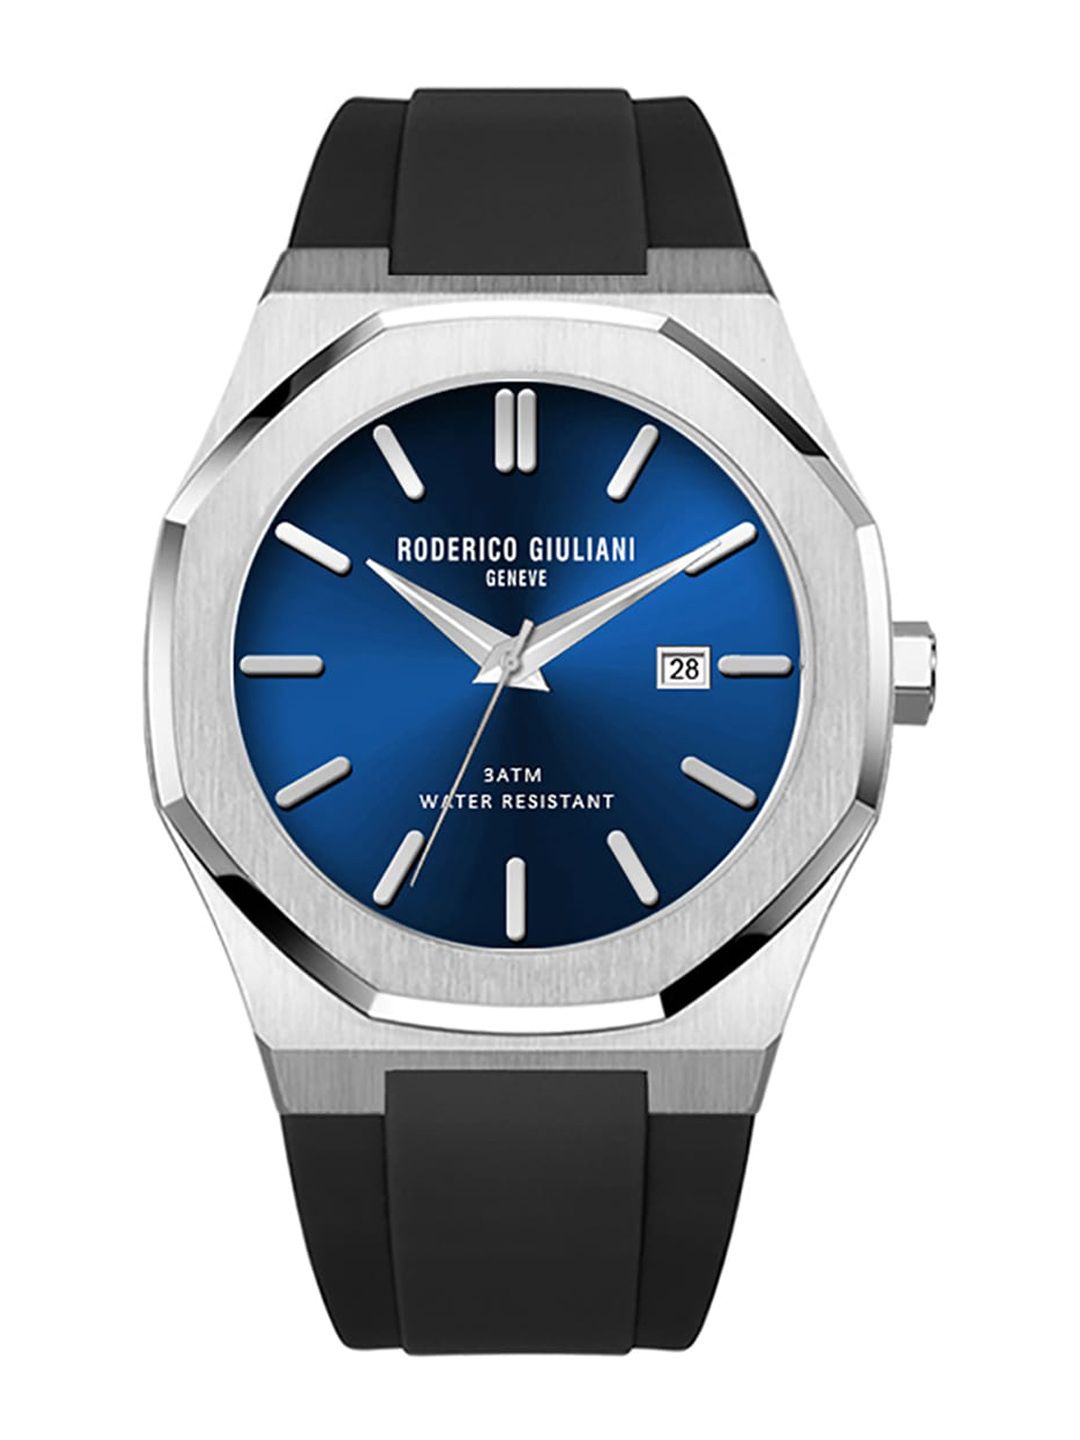 RODERICO GIULIANI Unisex Blue Dial & Black Straps Analogue Watch RG-MSLA71000001 Price in India